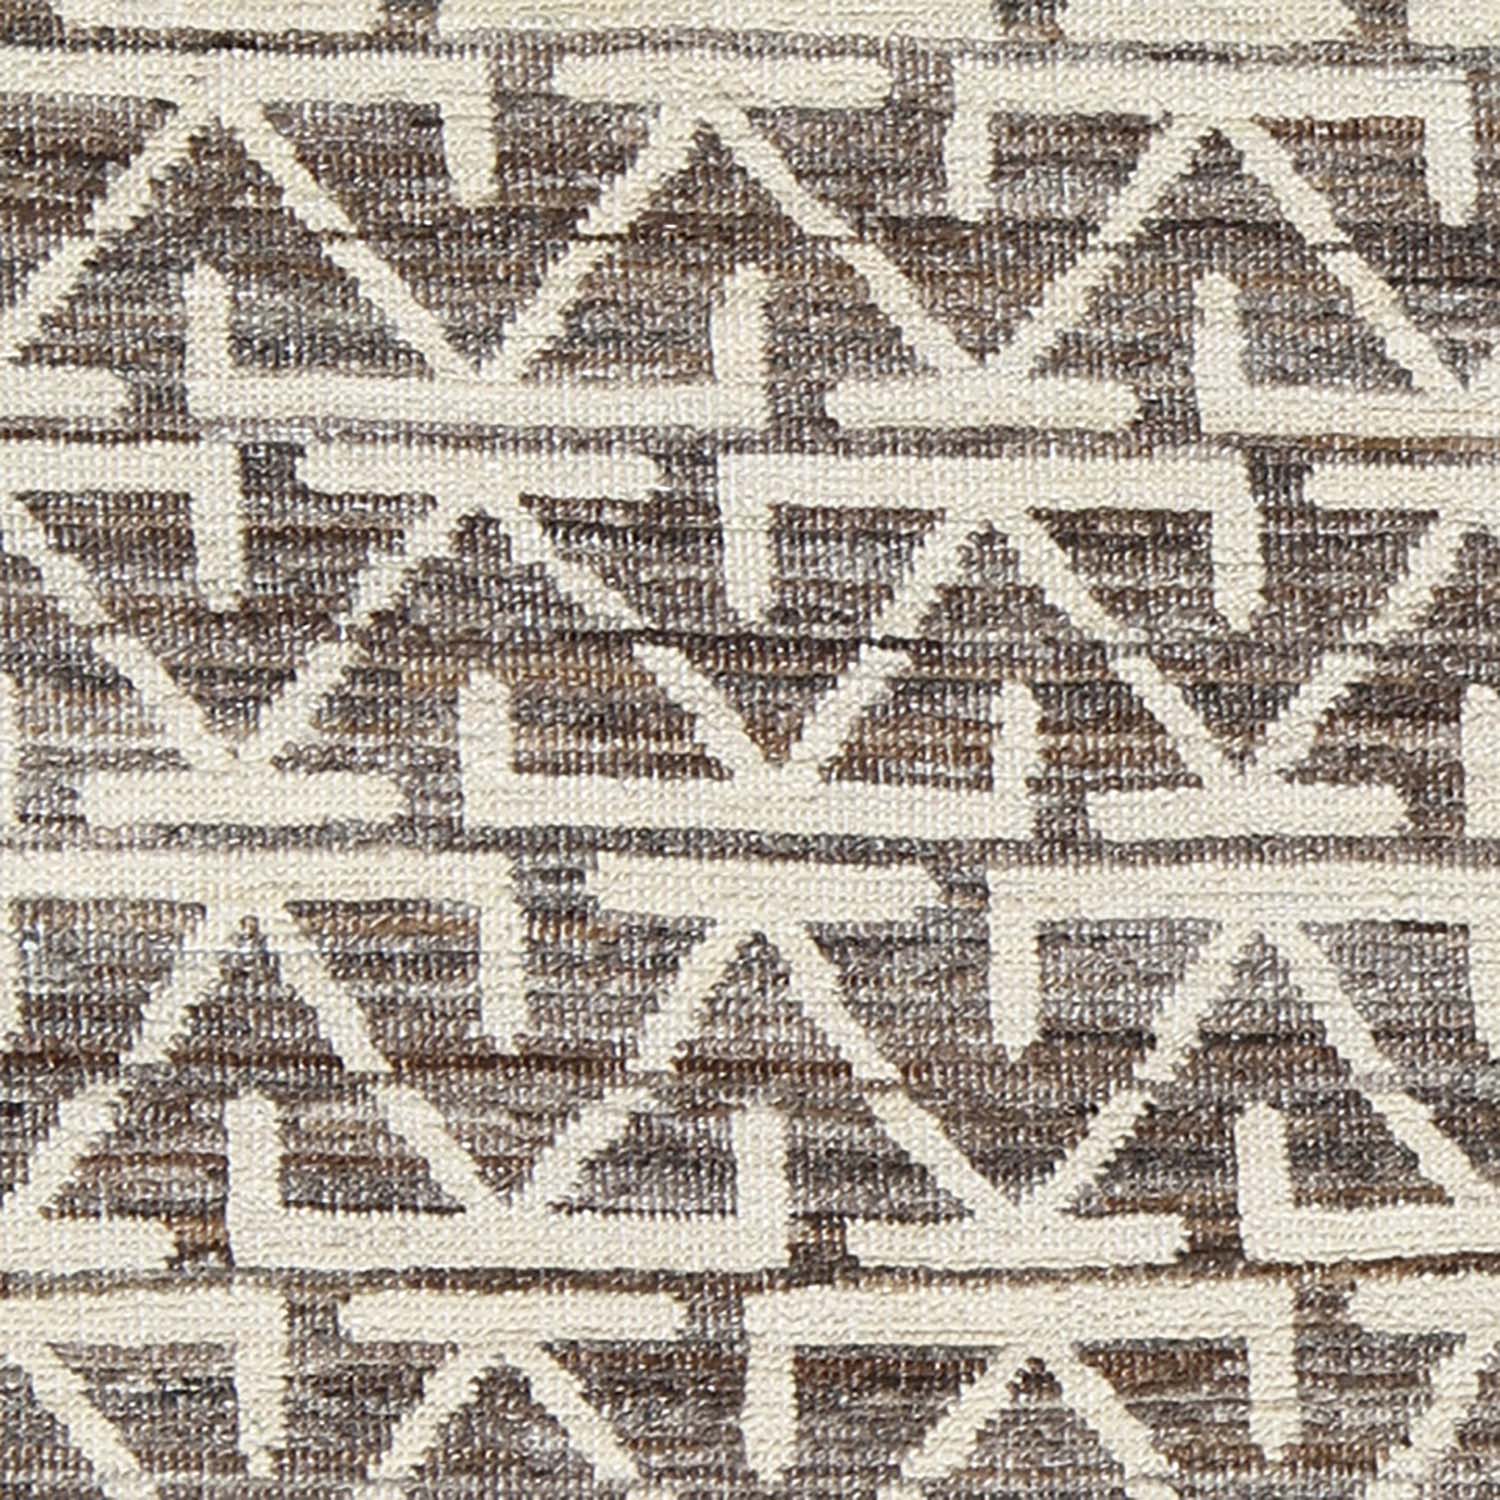 Geometric patterned fabric with triangles and diamond-like figures in neutral colors.